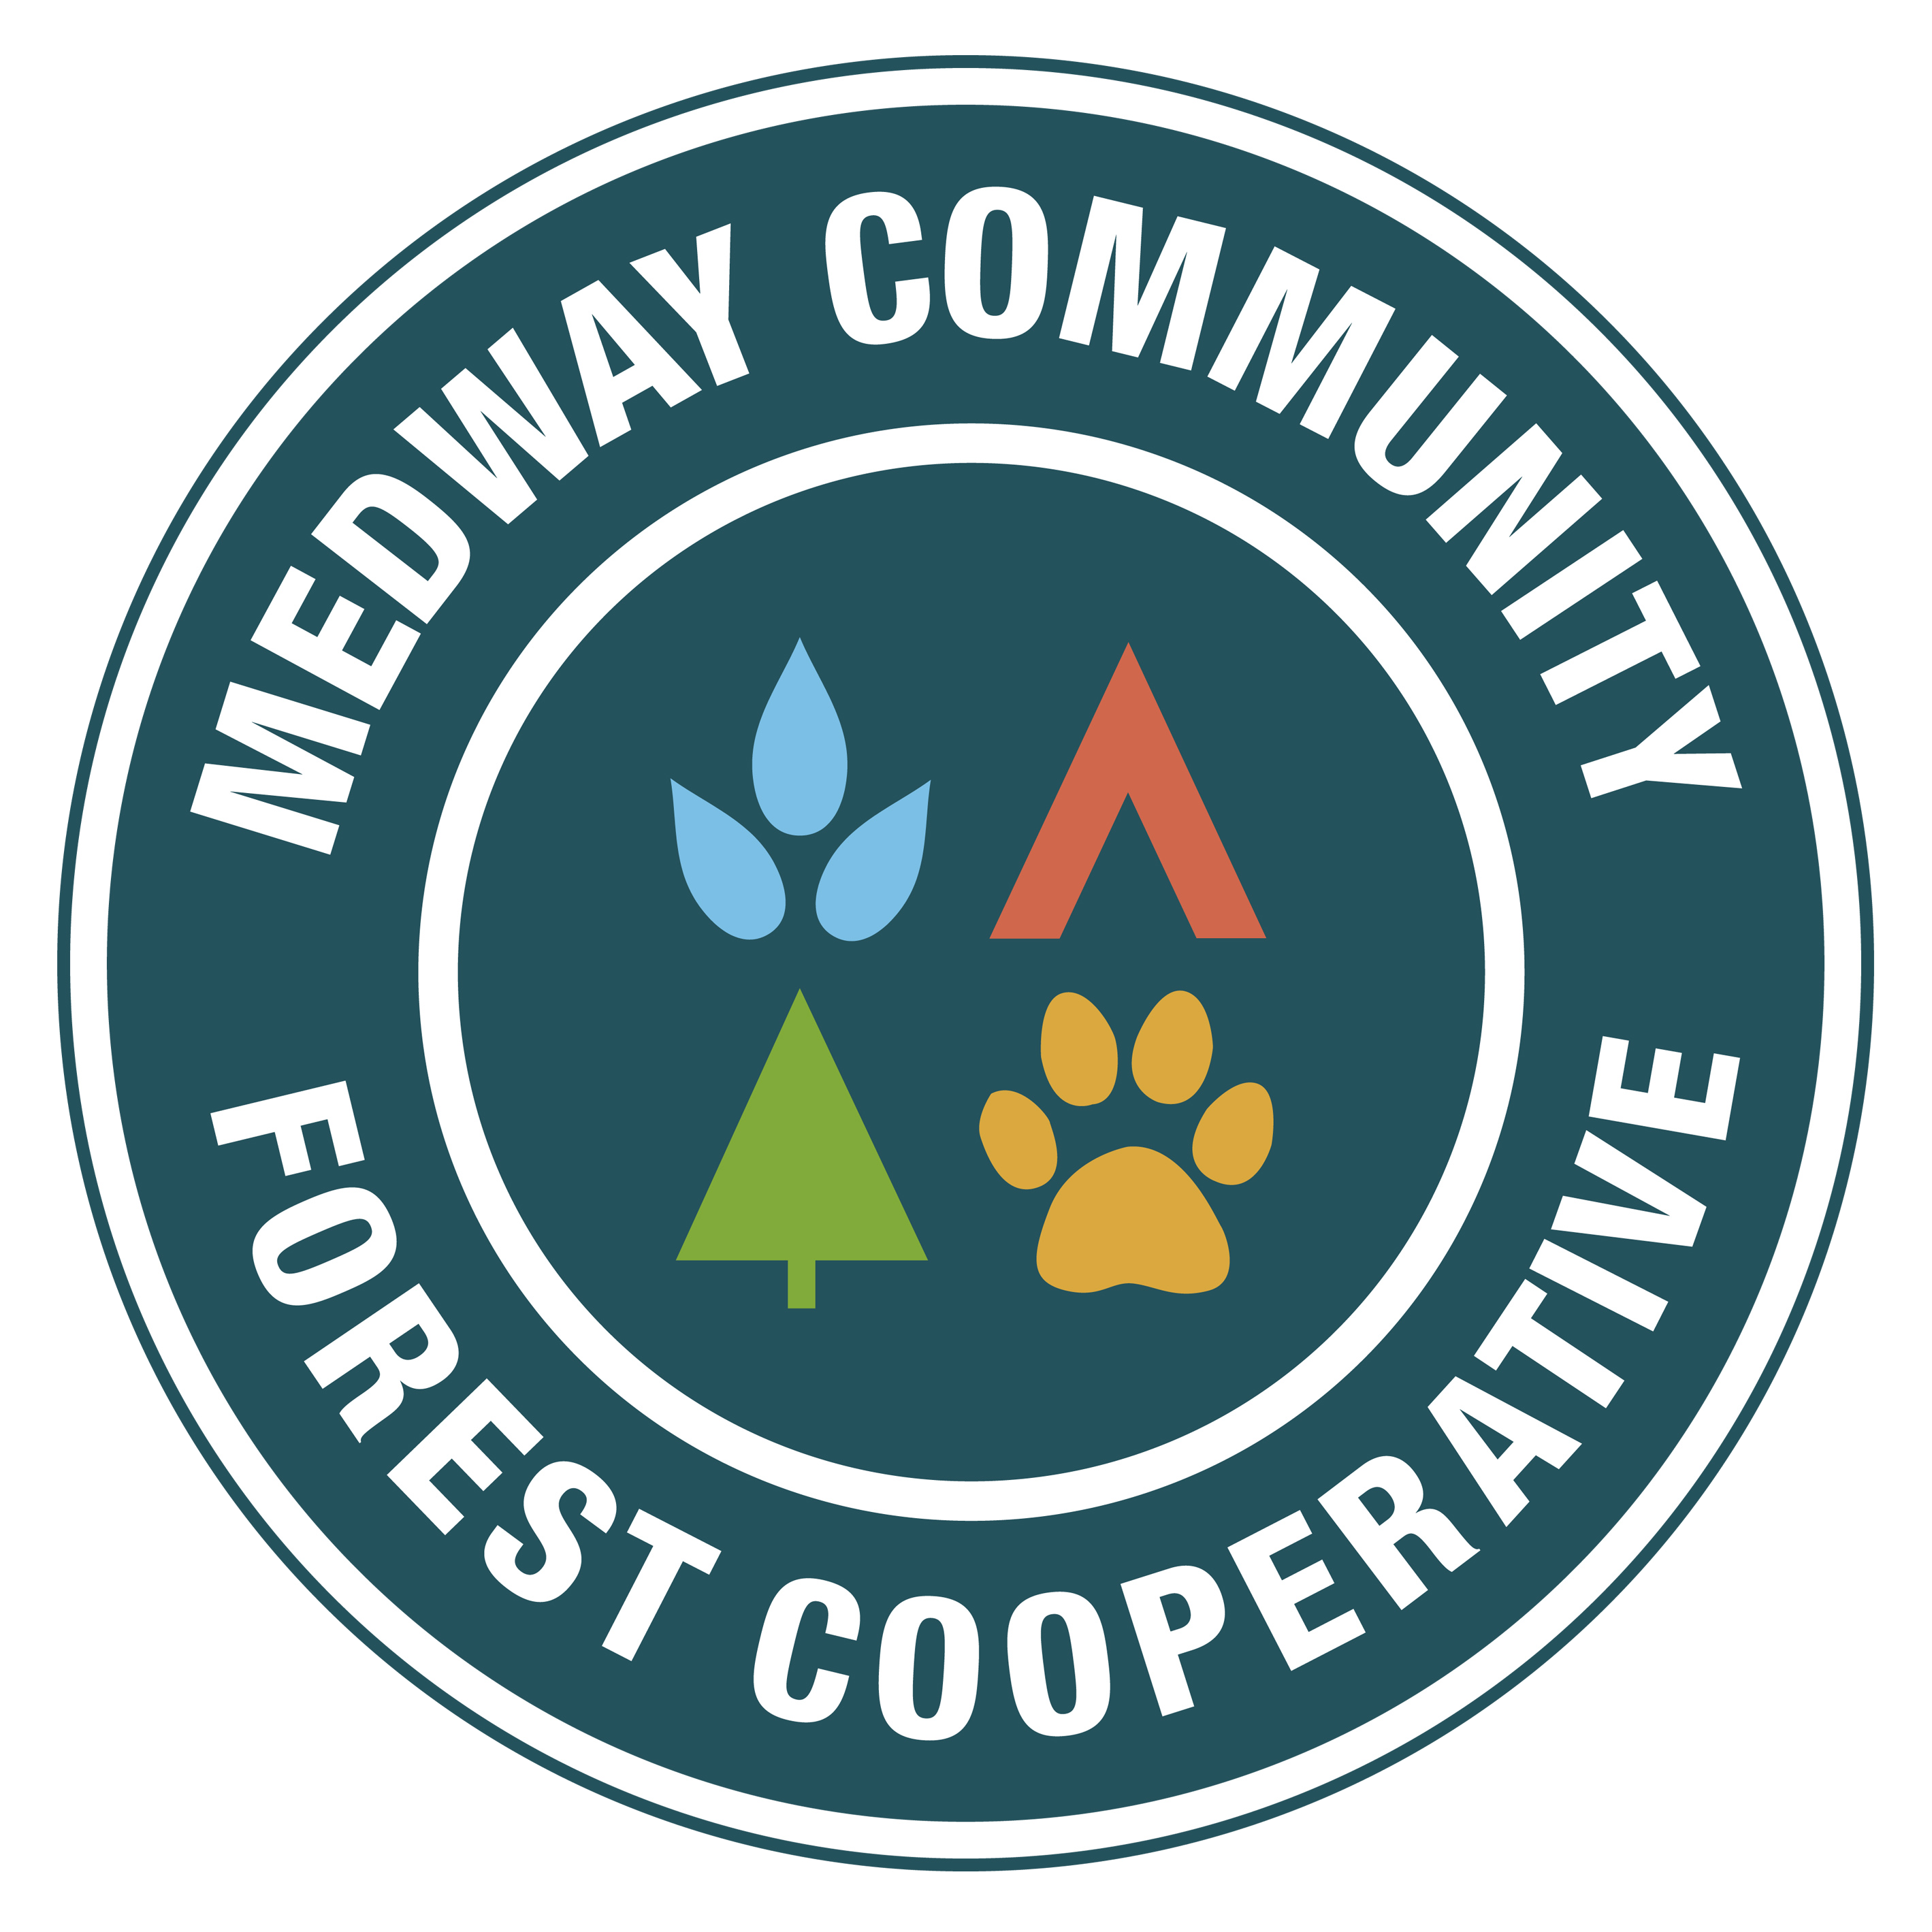 Medway Community Forest Cooperative logo